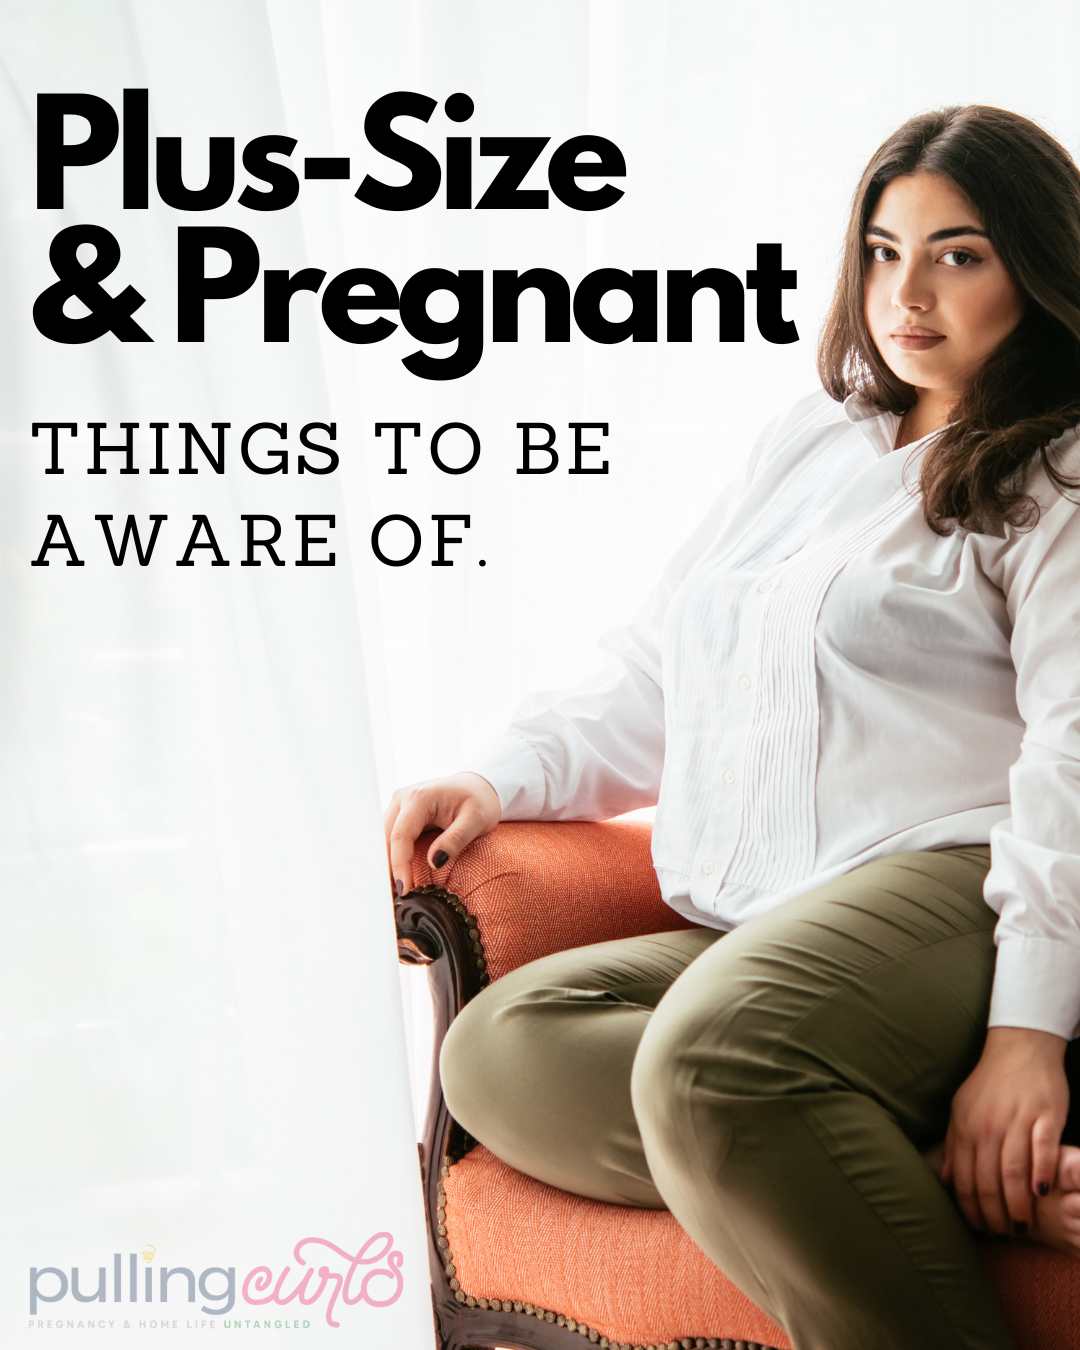 Are you plus size, pregnant, and struggling to navigate this unique period? Come along as we debunk misconceptions and provide practical, body-positive tips to empower you through your pregnancy journey! No scare-tactics, no shaming #PlusSizePregnancy Plus size pregnancy Maternity fashion Mom-to-be Body positivity Pregnancy style Plus size maternity wear Flattering silhouettes Comfortable essentials Pregnancy confidence via @pullingcurls